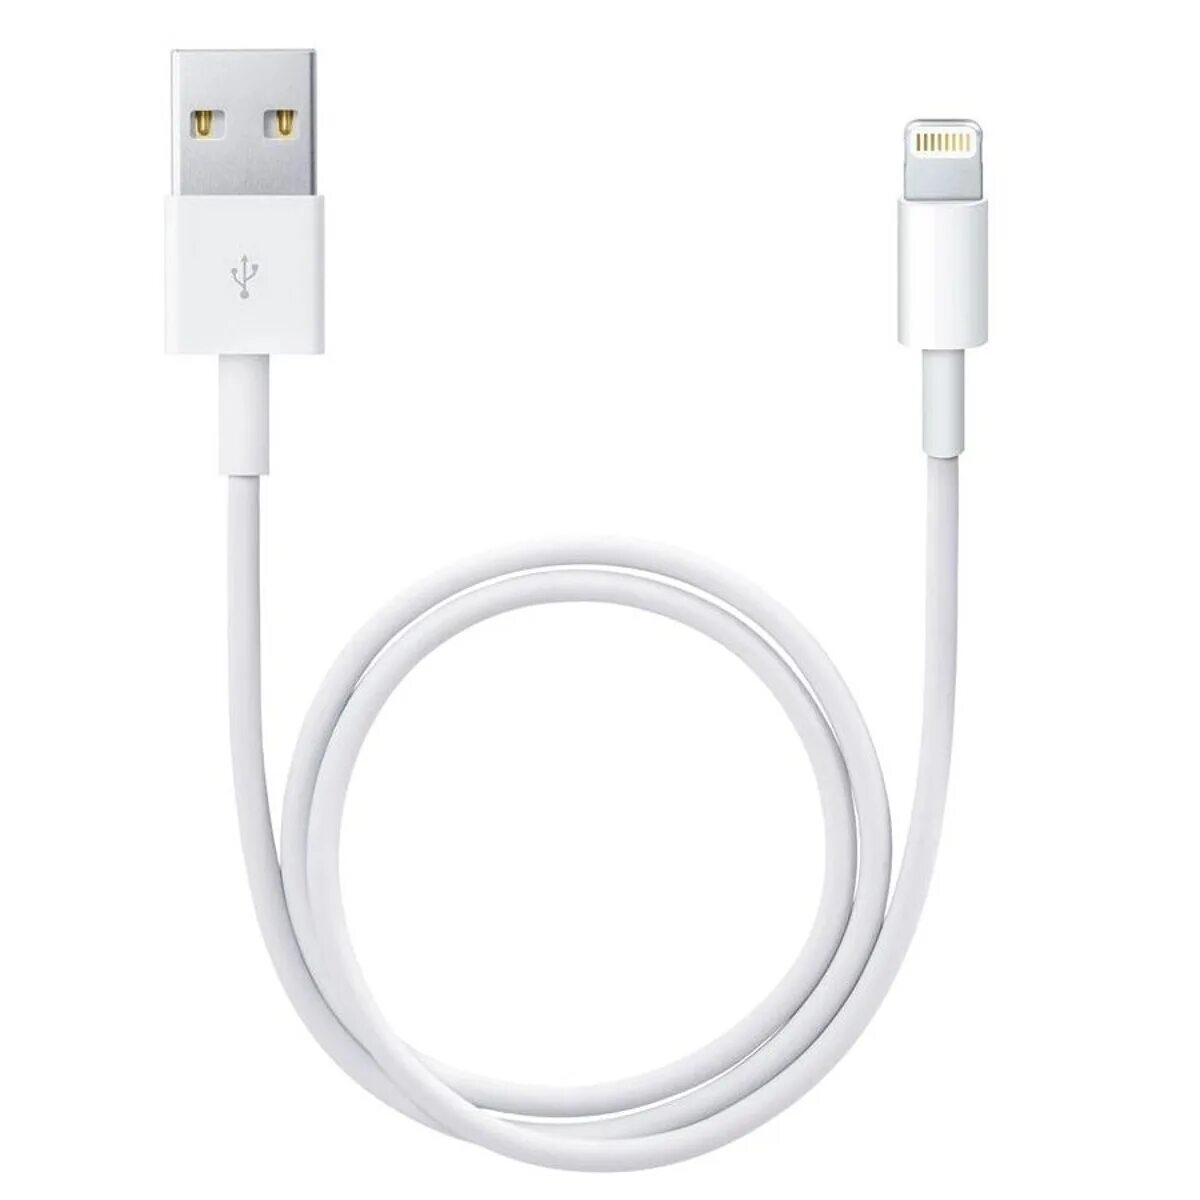 Mi usb c. Apple USB-C charge Cable (2m). Кабель Apple mxly2zm/a, Lightning (m) - USB (M), 1м, MFI, белый. Кабель Apple USB - Lightning mxly2zm/a (1 метр). Apple Cable Lightning to USB 1 M md818zm/a.